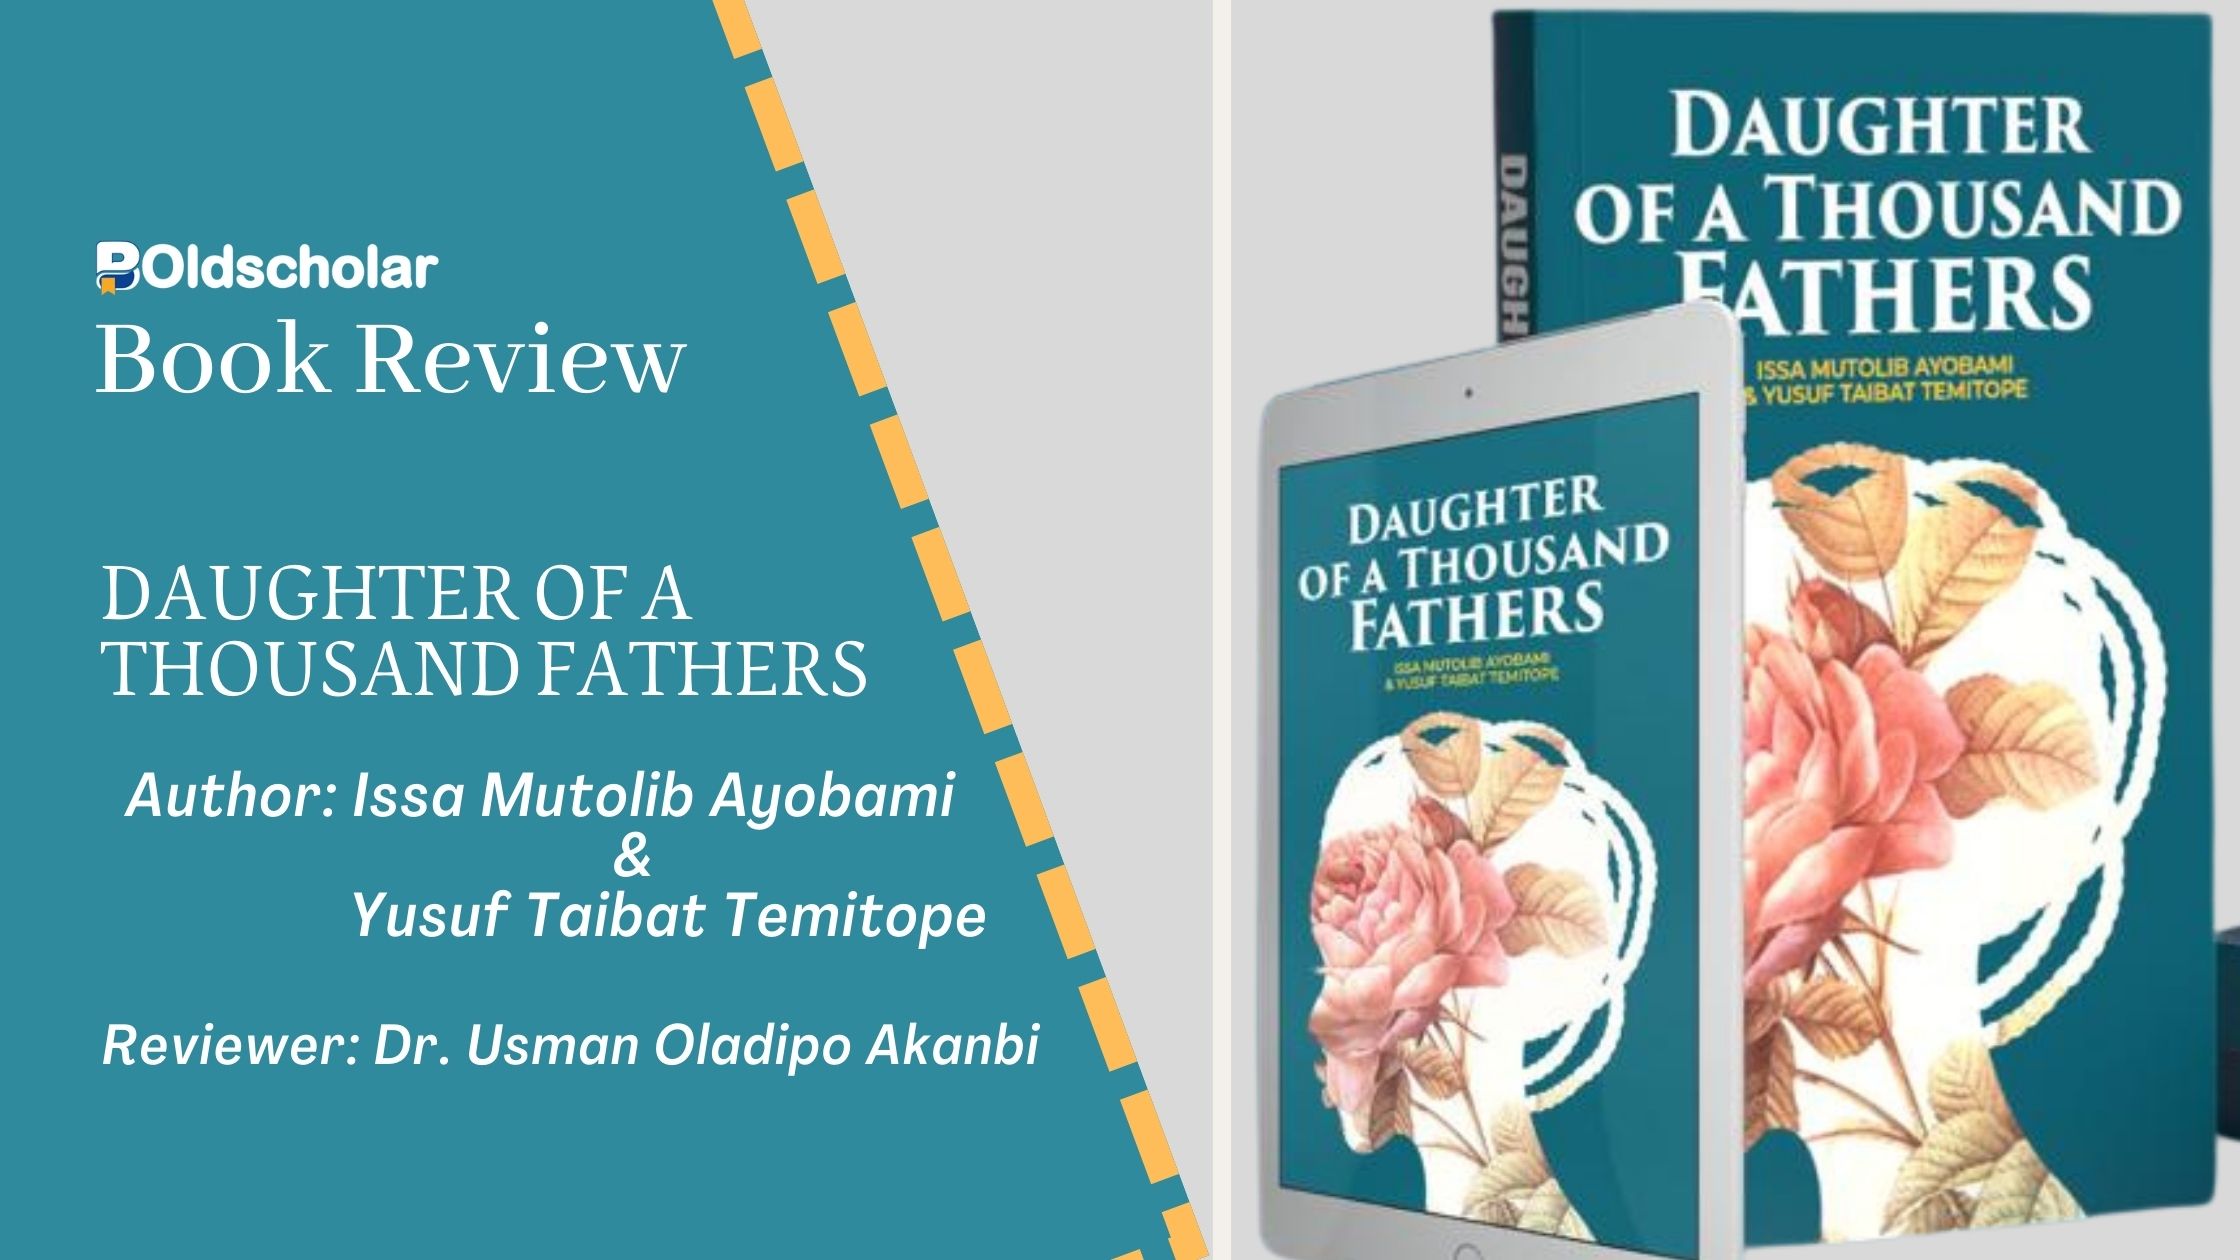 A Girl Is a Precious Gift: A Review of Daughter of a Thousand Fathers by Dr. Usman Oladipo Akanbi